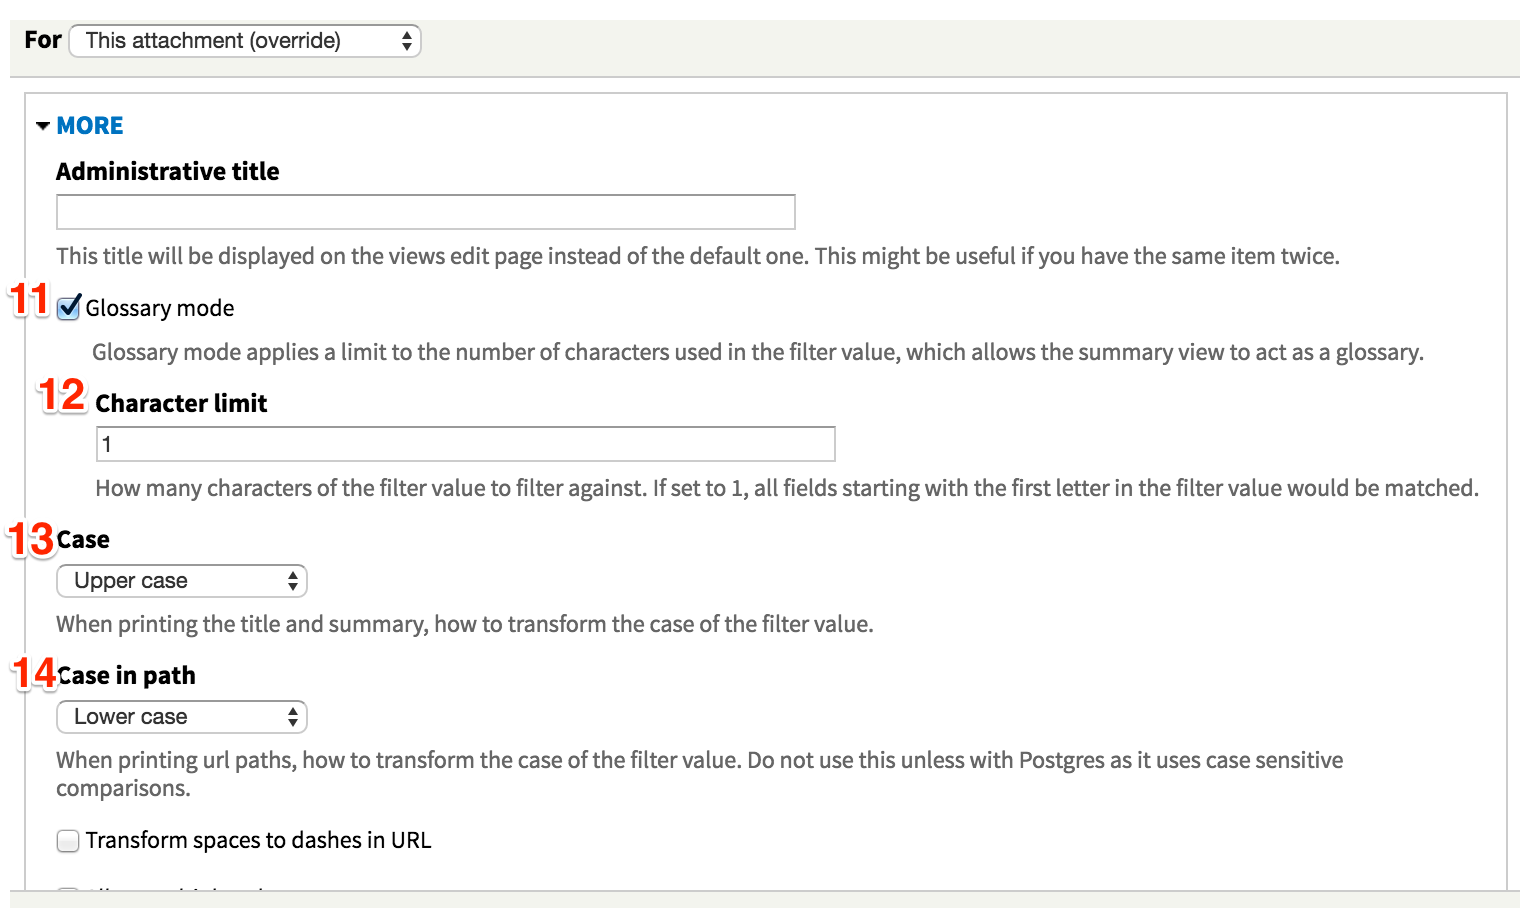 Screenshot for steps 11-14 of configuring the contextual filter.